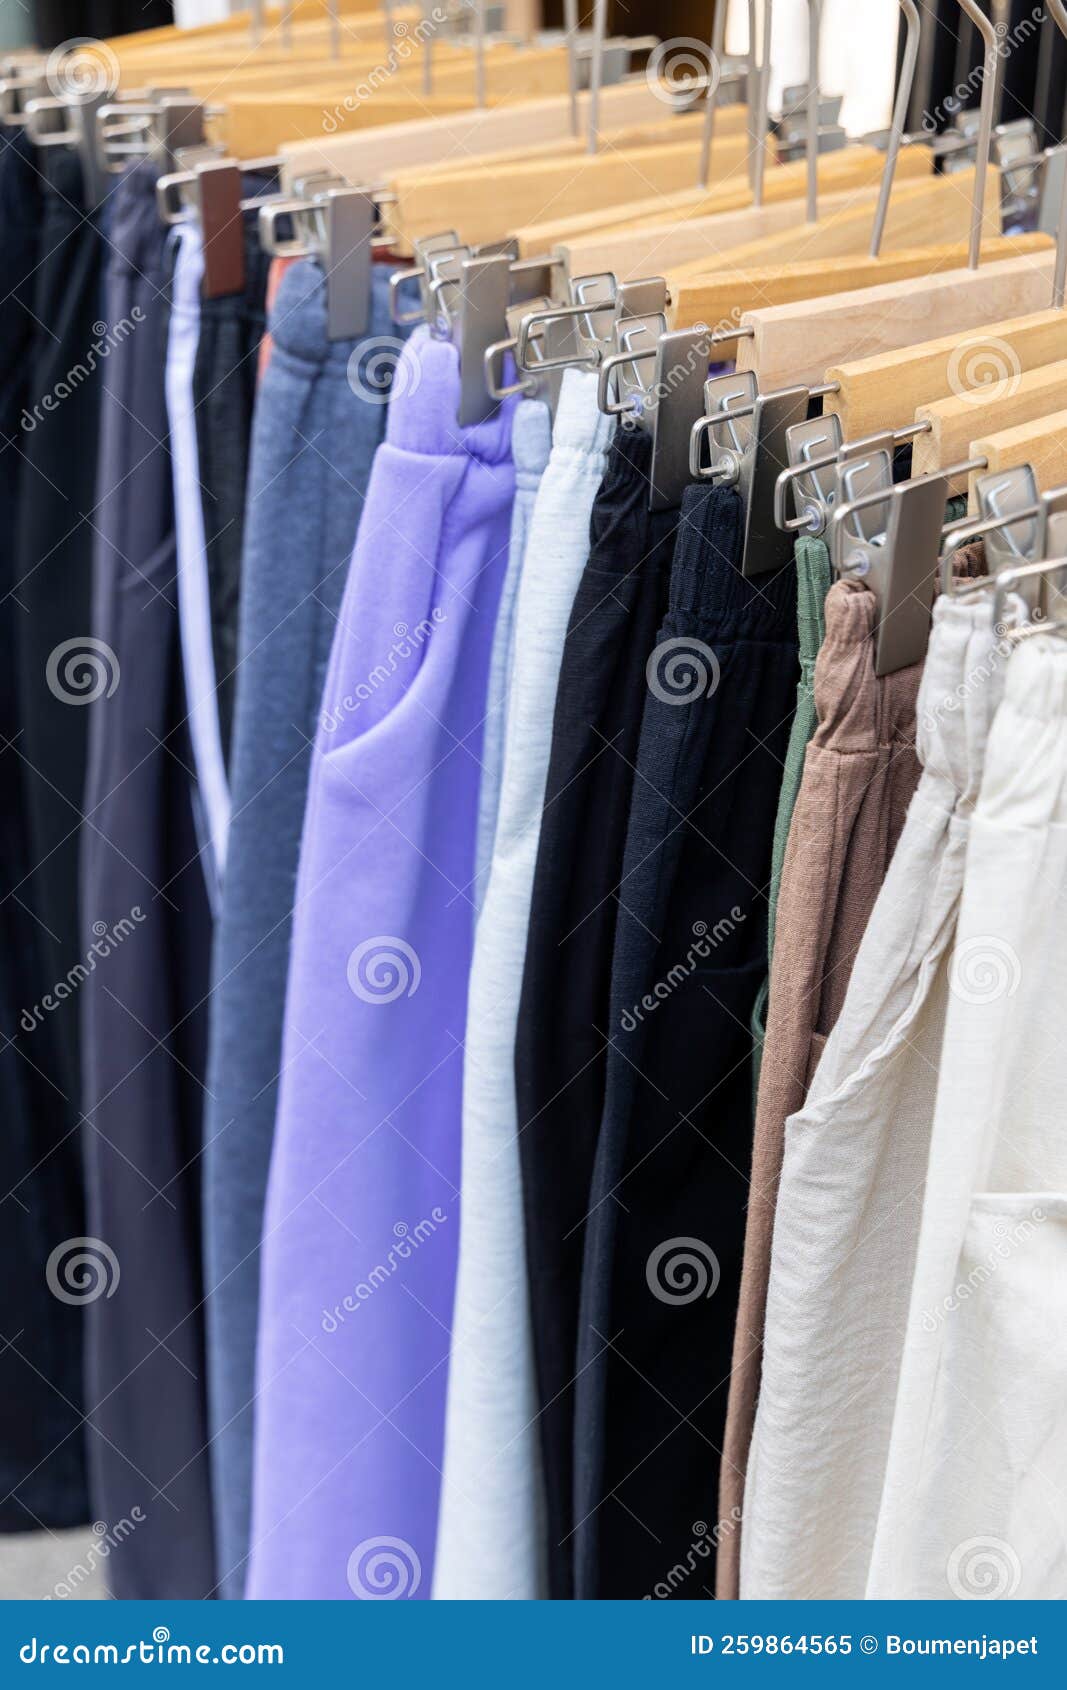 A Shopping Rank Filled with Clothes, Pants, Sports Clothes. Bunch of Clothes  of Different Colors for Sale Stock Image - Image of monday, clothes:  259864565